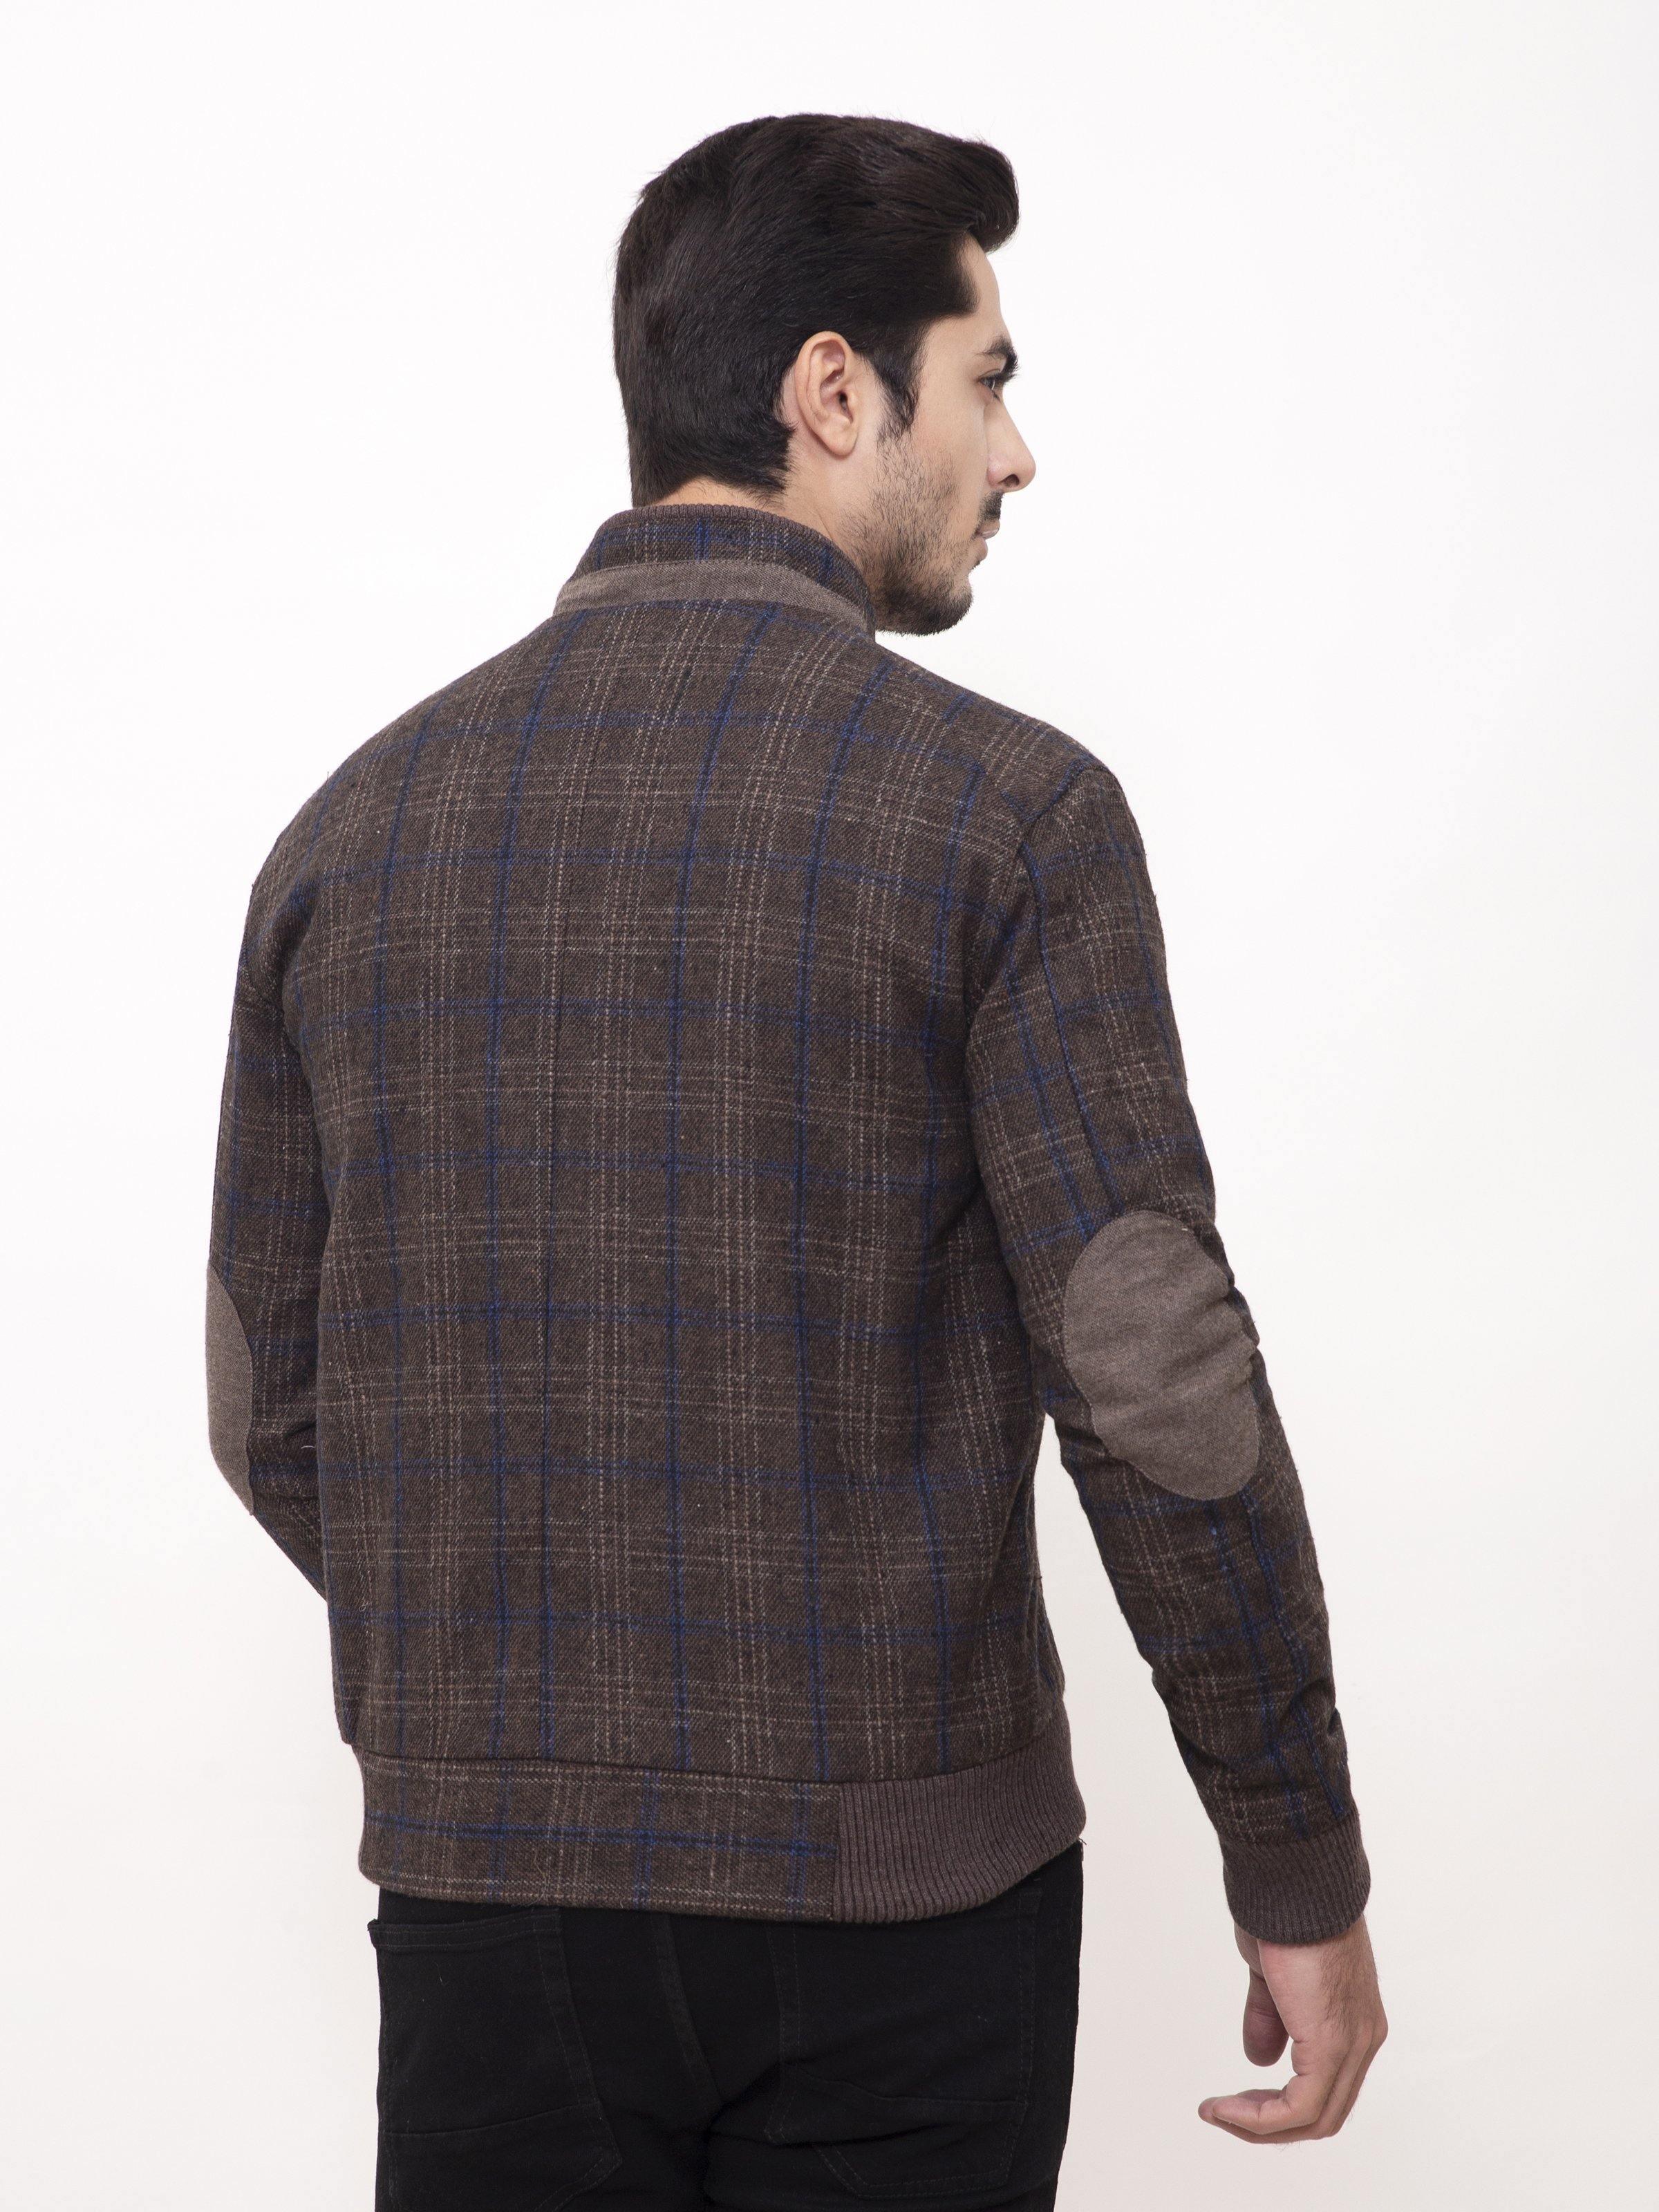 WOOLEN JACKET FULL SLEEVE BROWN BLACK at Charcoal Clothing